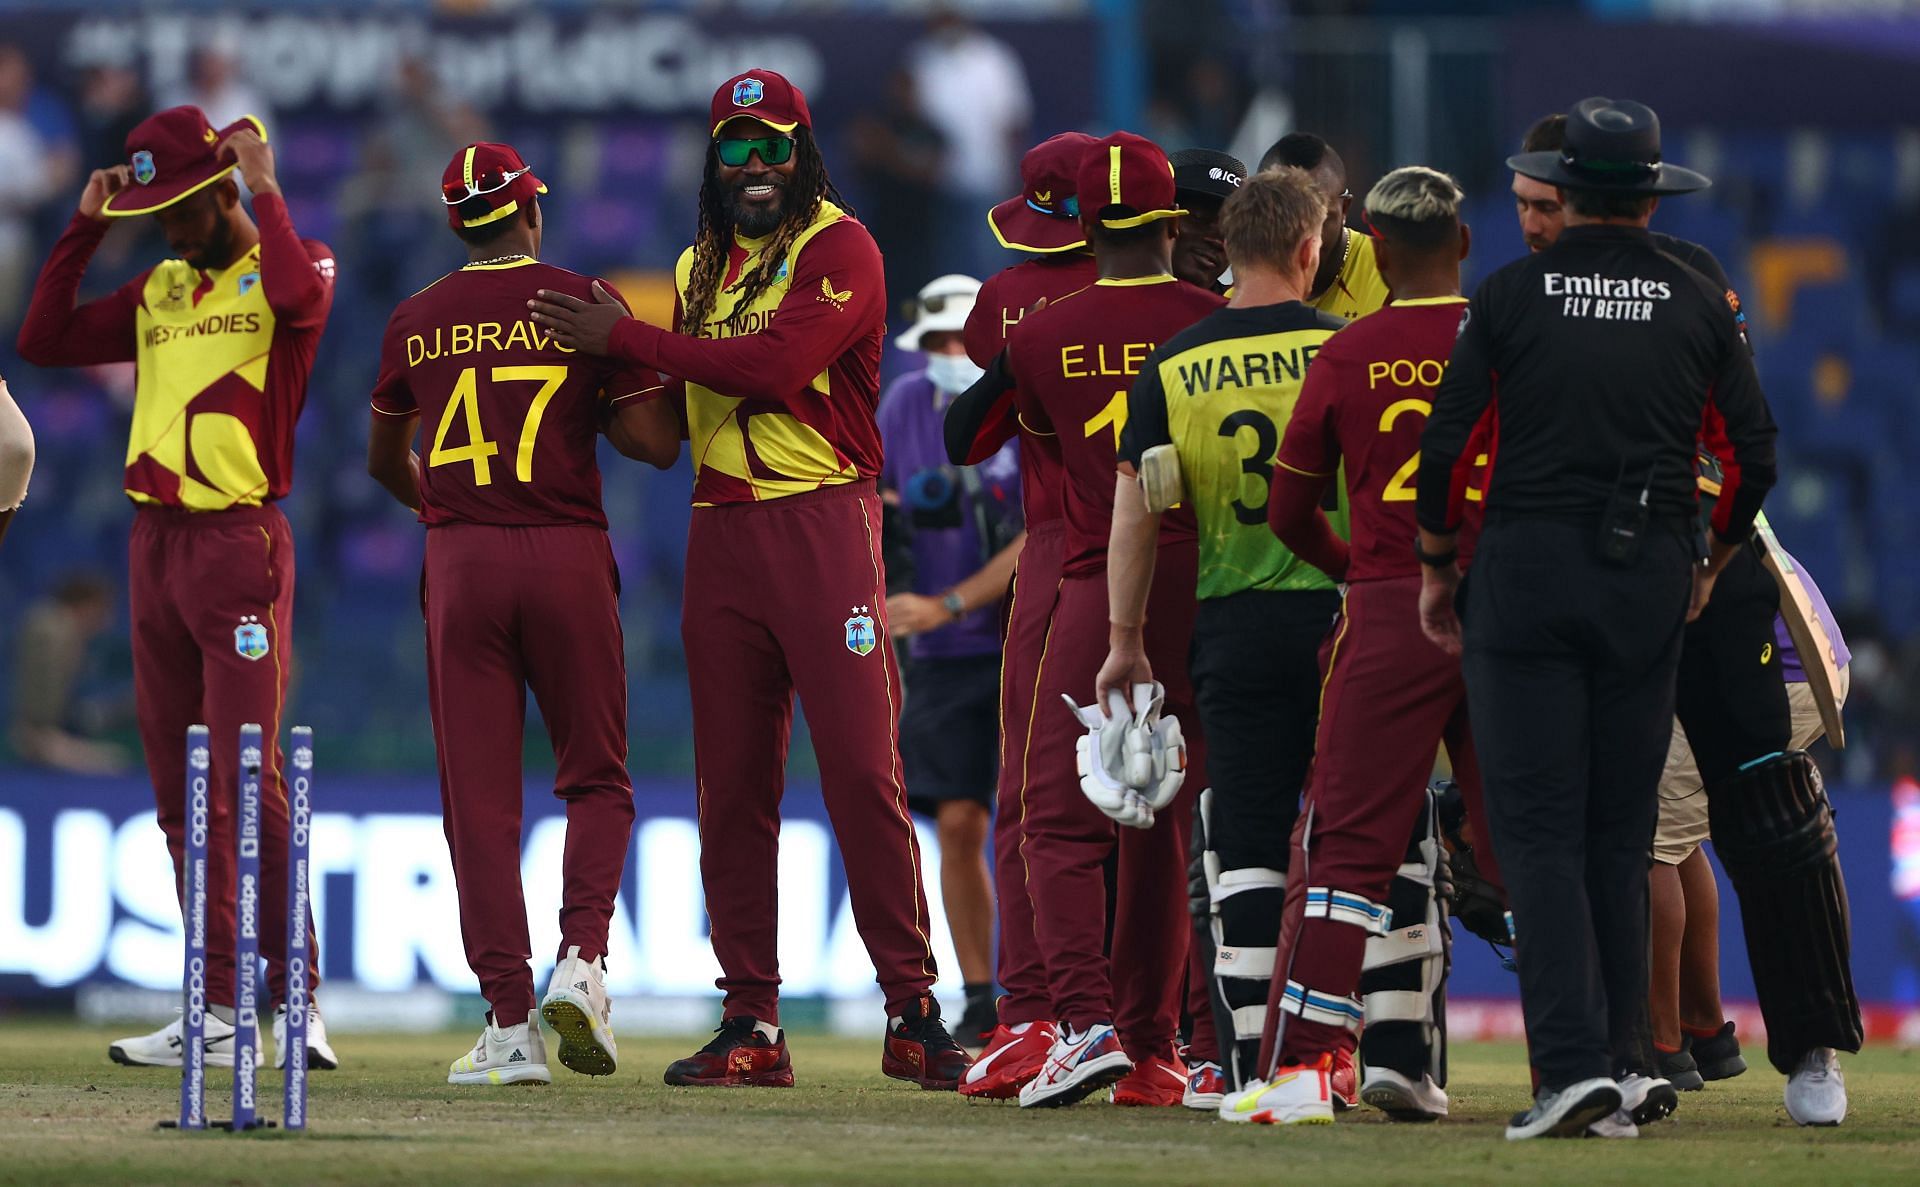 West Indies won a solitary match in T20 World Cup 2021